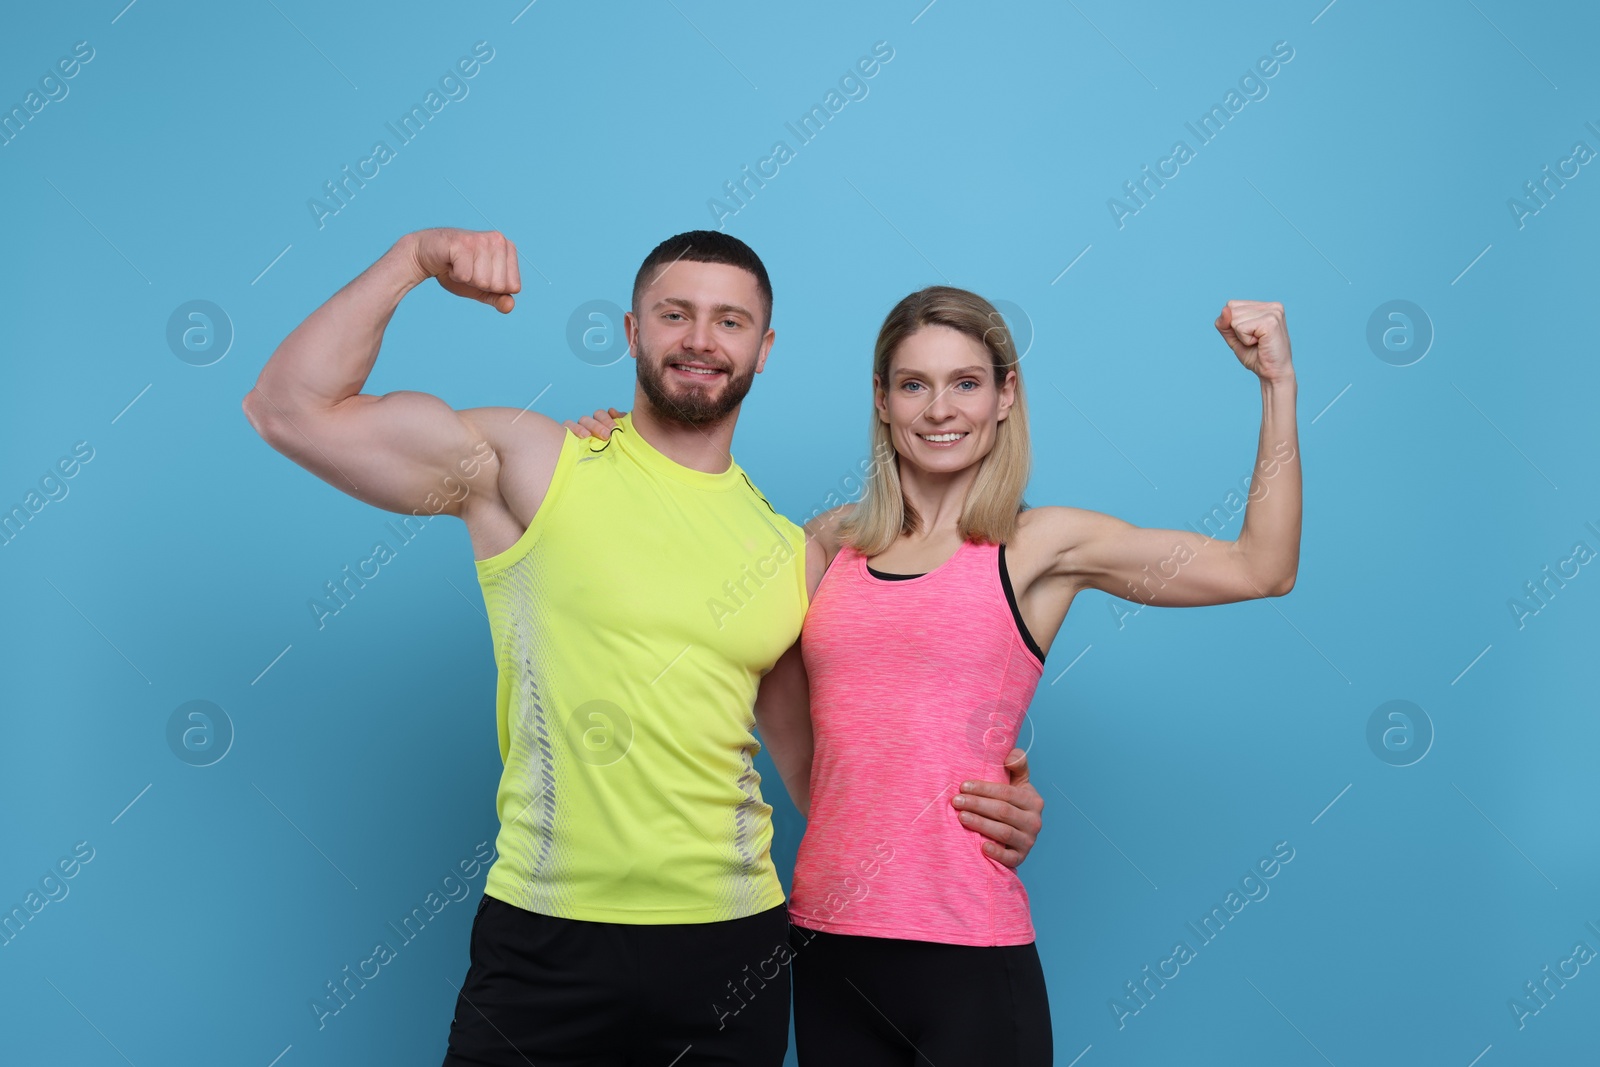 Photo of Athletic people showing muscles on light blue background